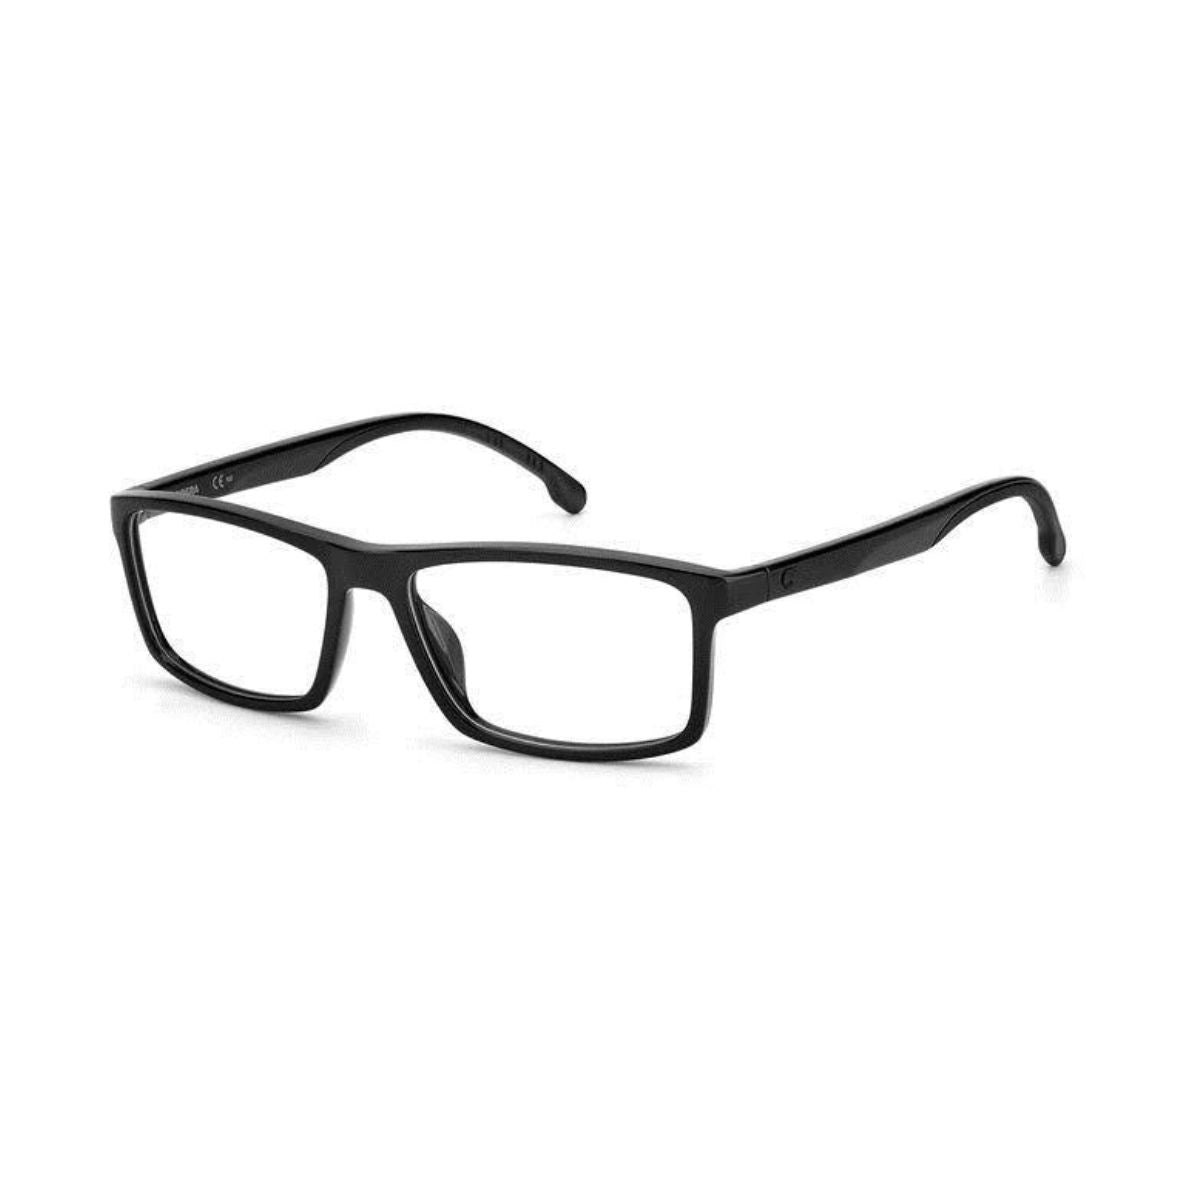 "buy Carrera 8872 807 stylish black color frame for men and women online at optorium"